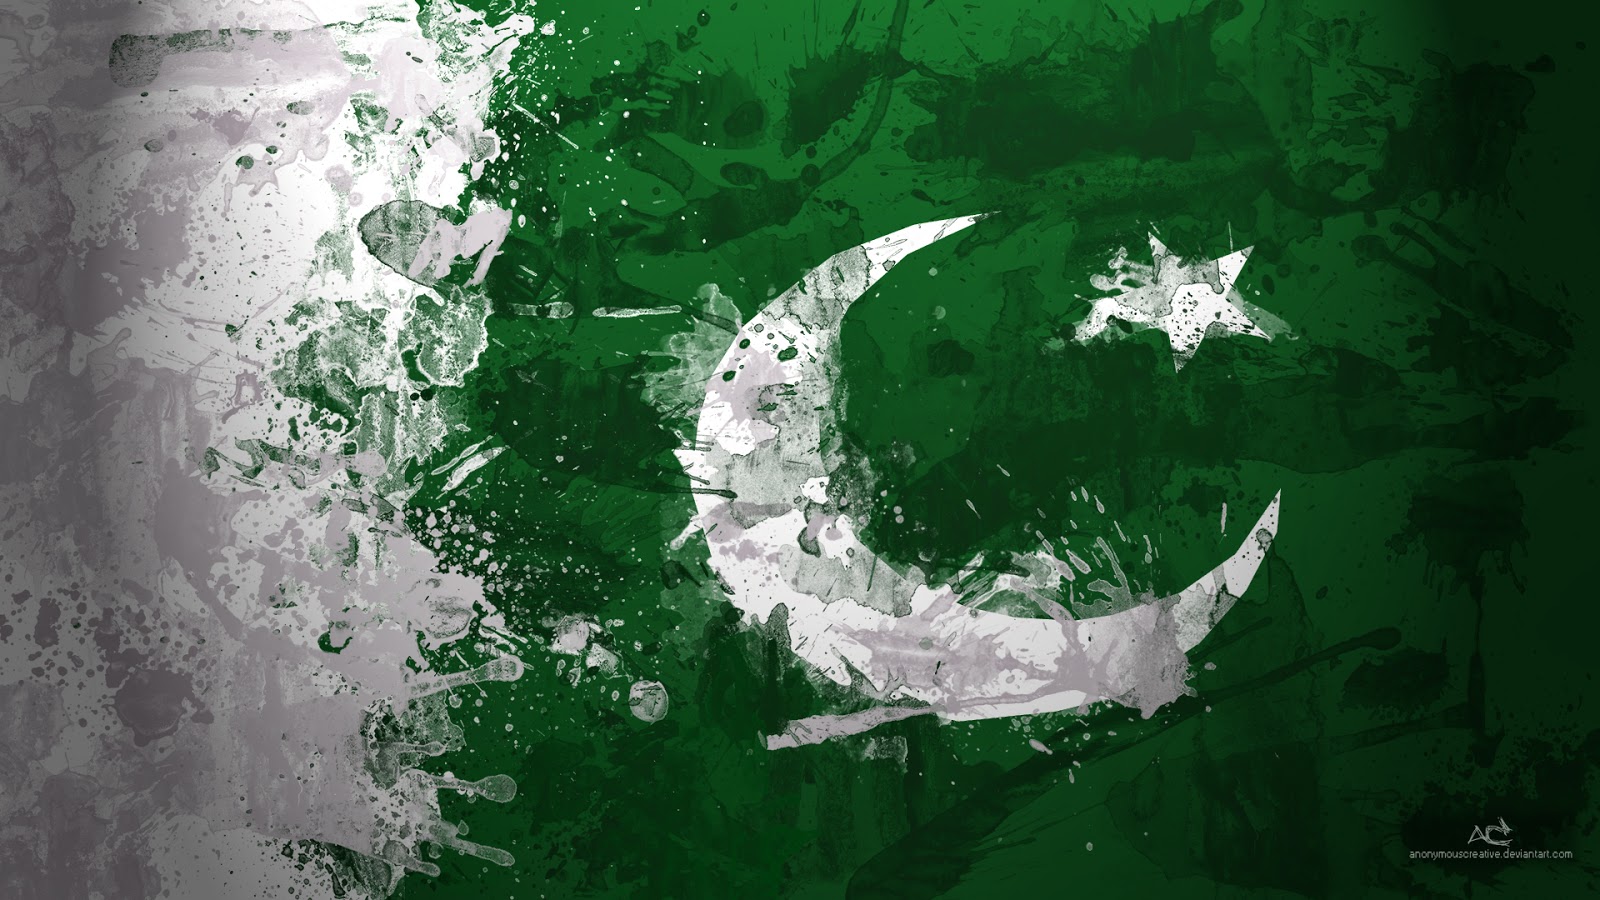 Pakistan Army Wallpapers | Sports Wallpapers | Events Wallpapers ...